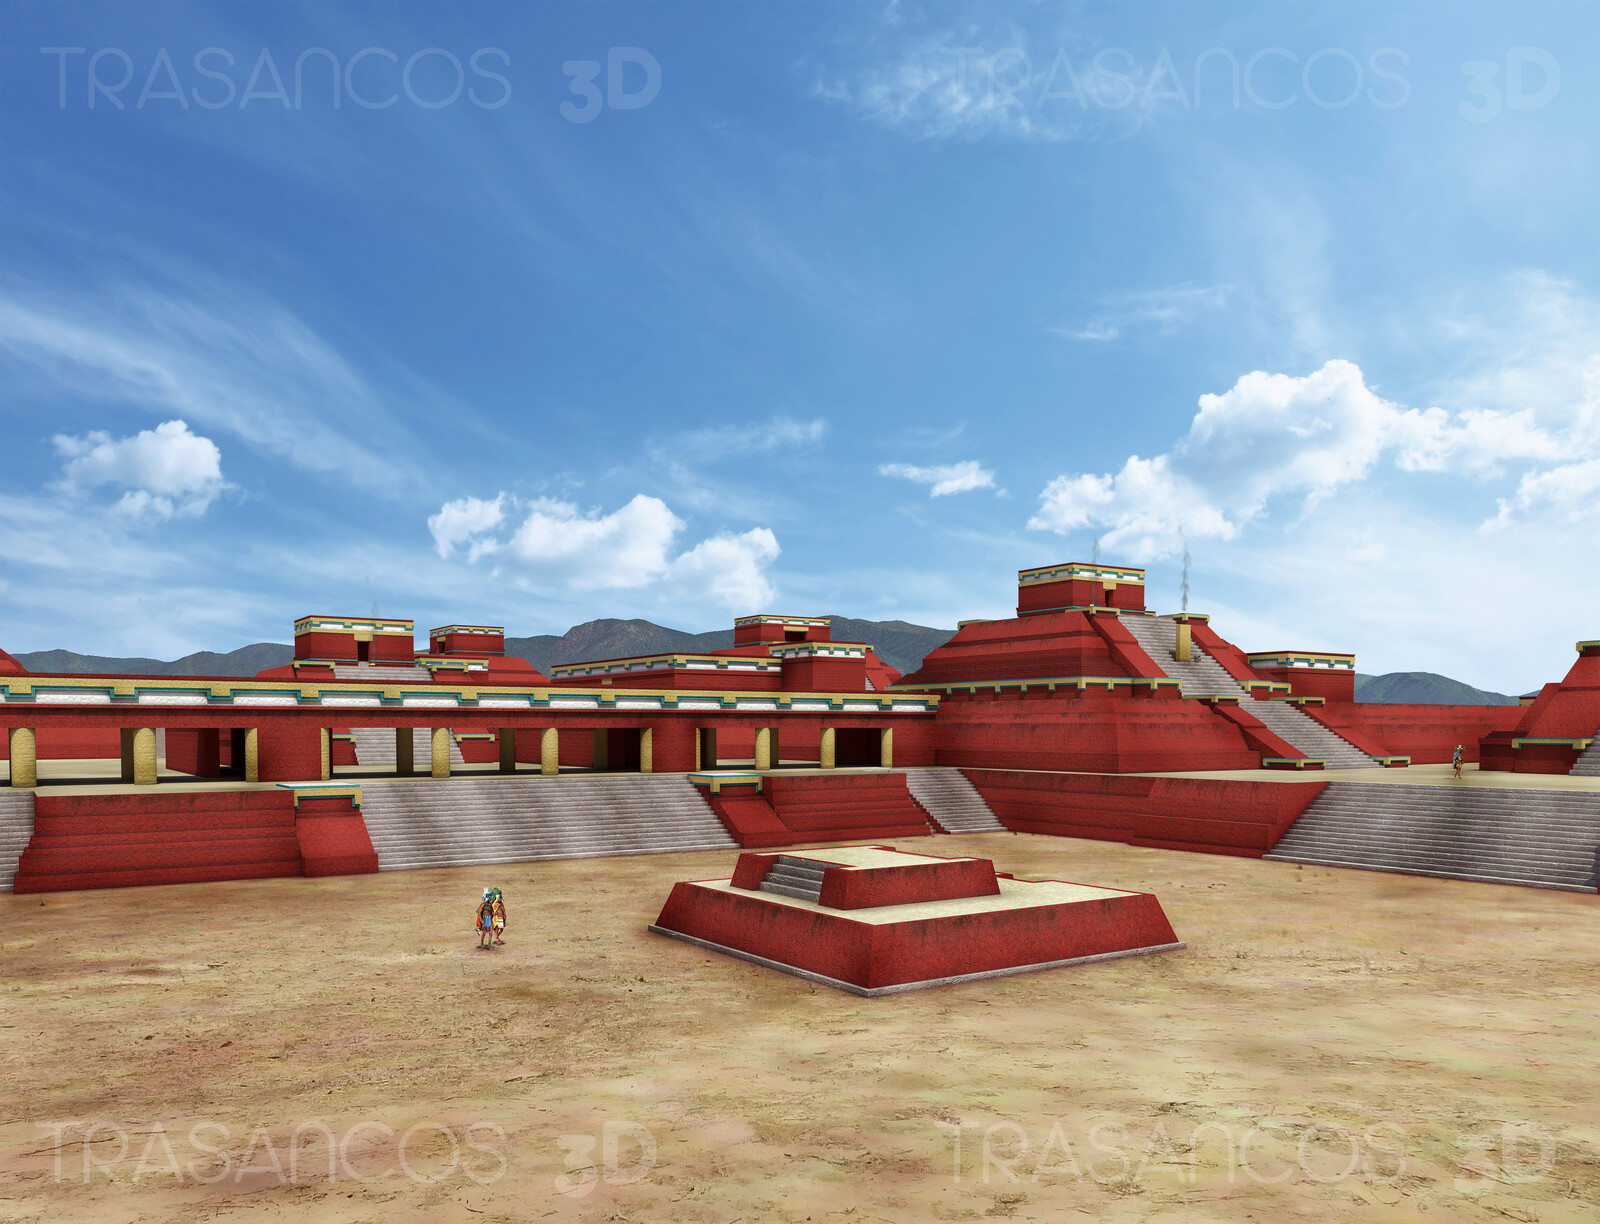 View of the North platform complex of Monte Albán.
Modeled in collaboration with:
- Diego Blanco